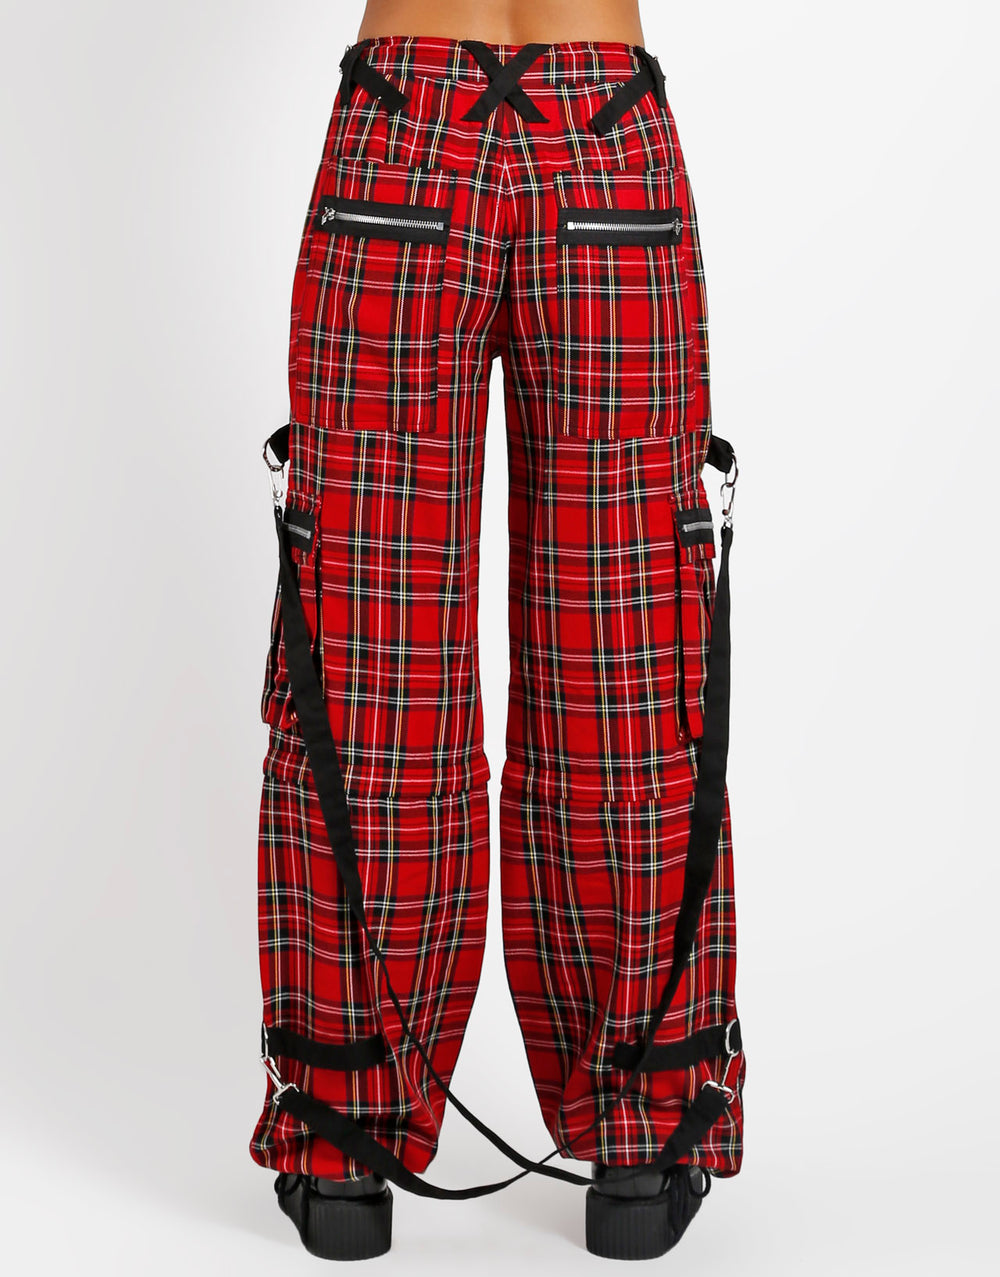 Check Yourself Plaid Pants  Red  Red plaid pants Fashion Plaid pants  outfit